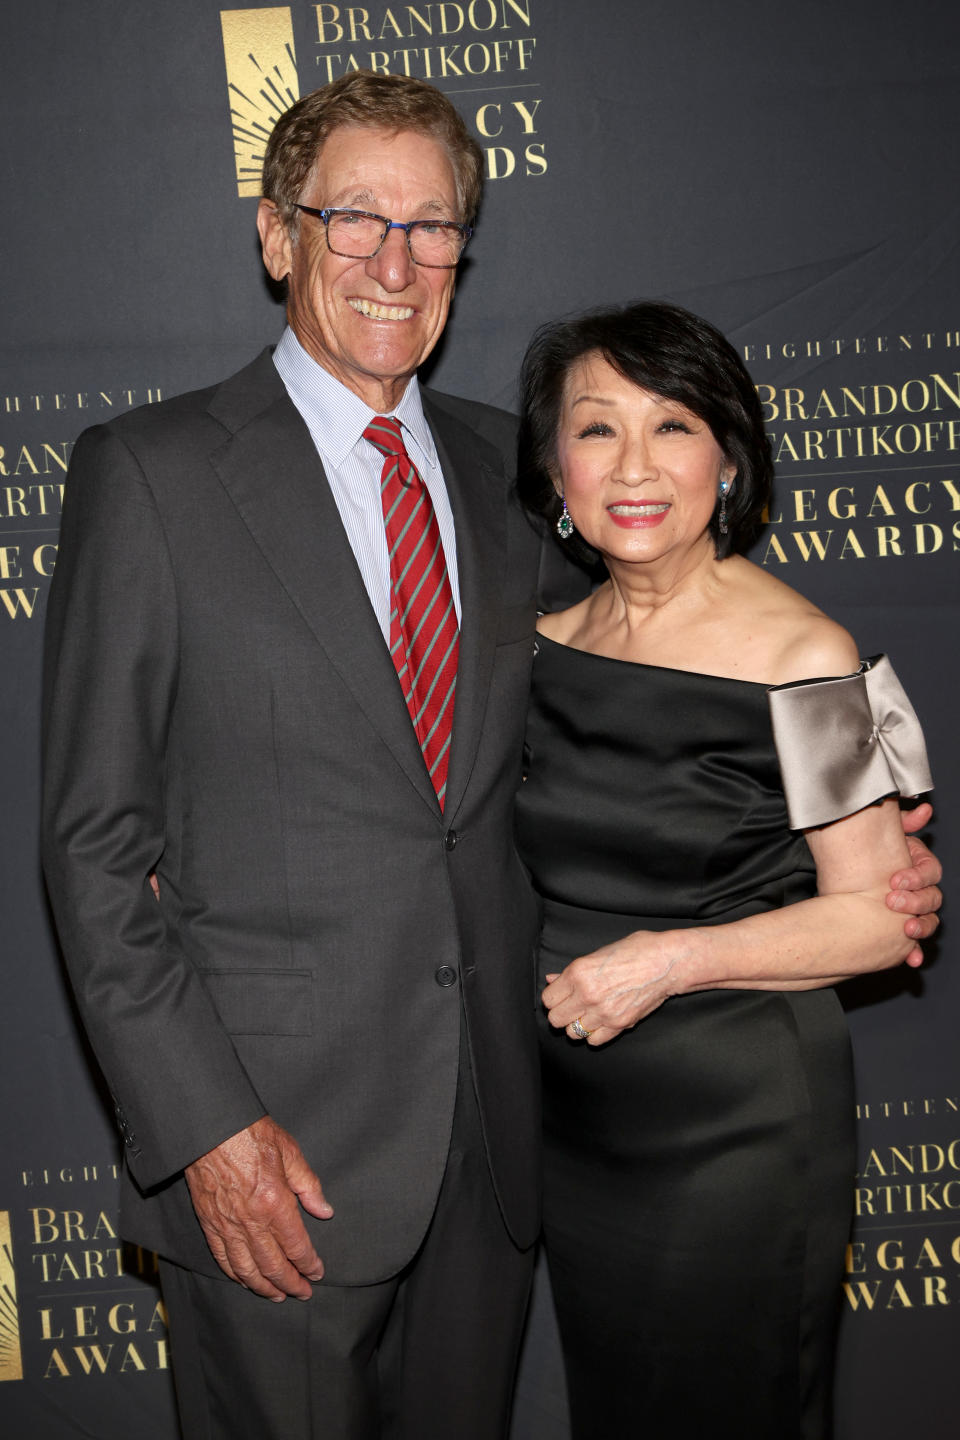 Maury Povich will be presented with his award by his wife, journalist Connie Chung. He credits her with his success.